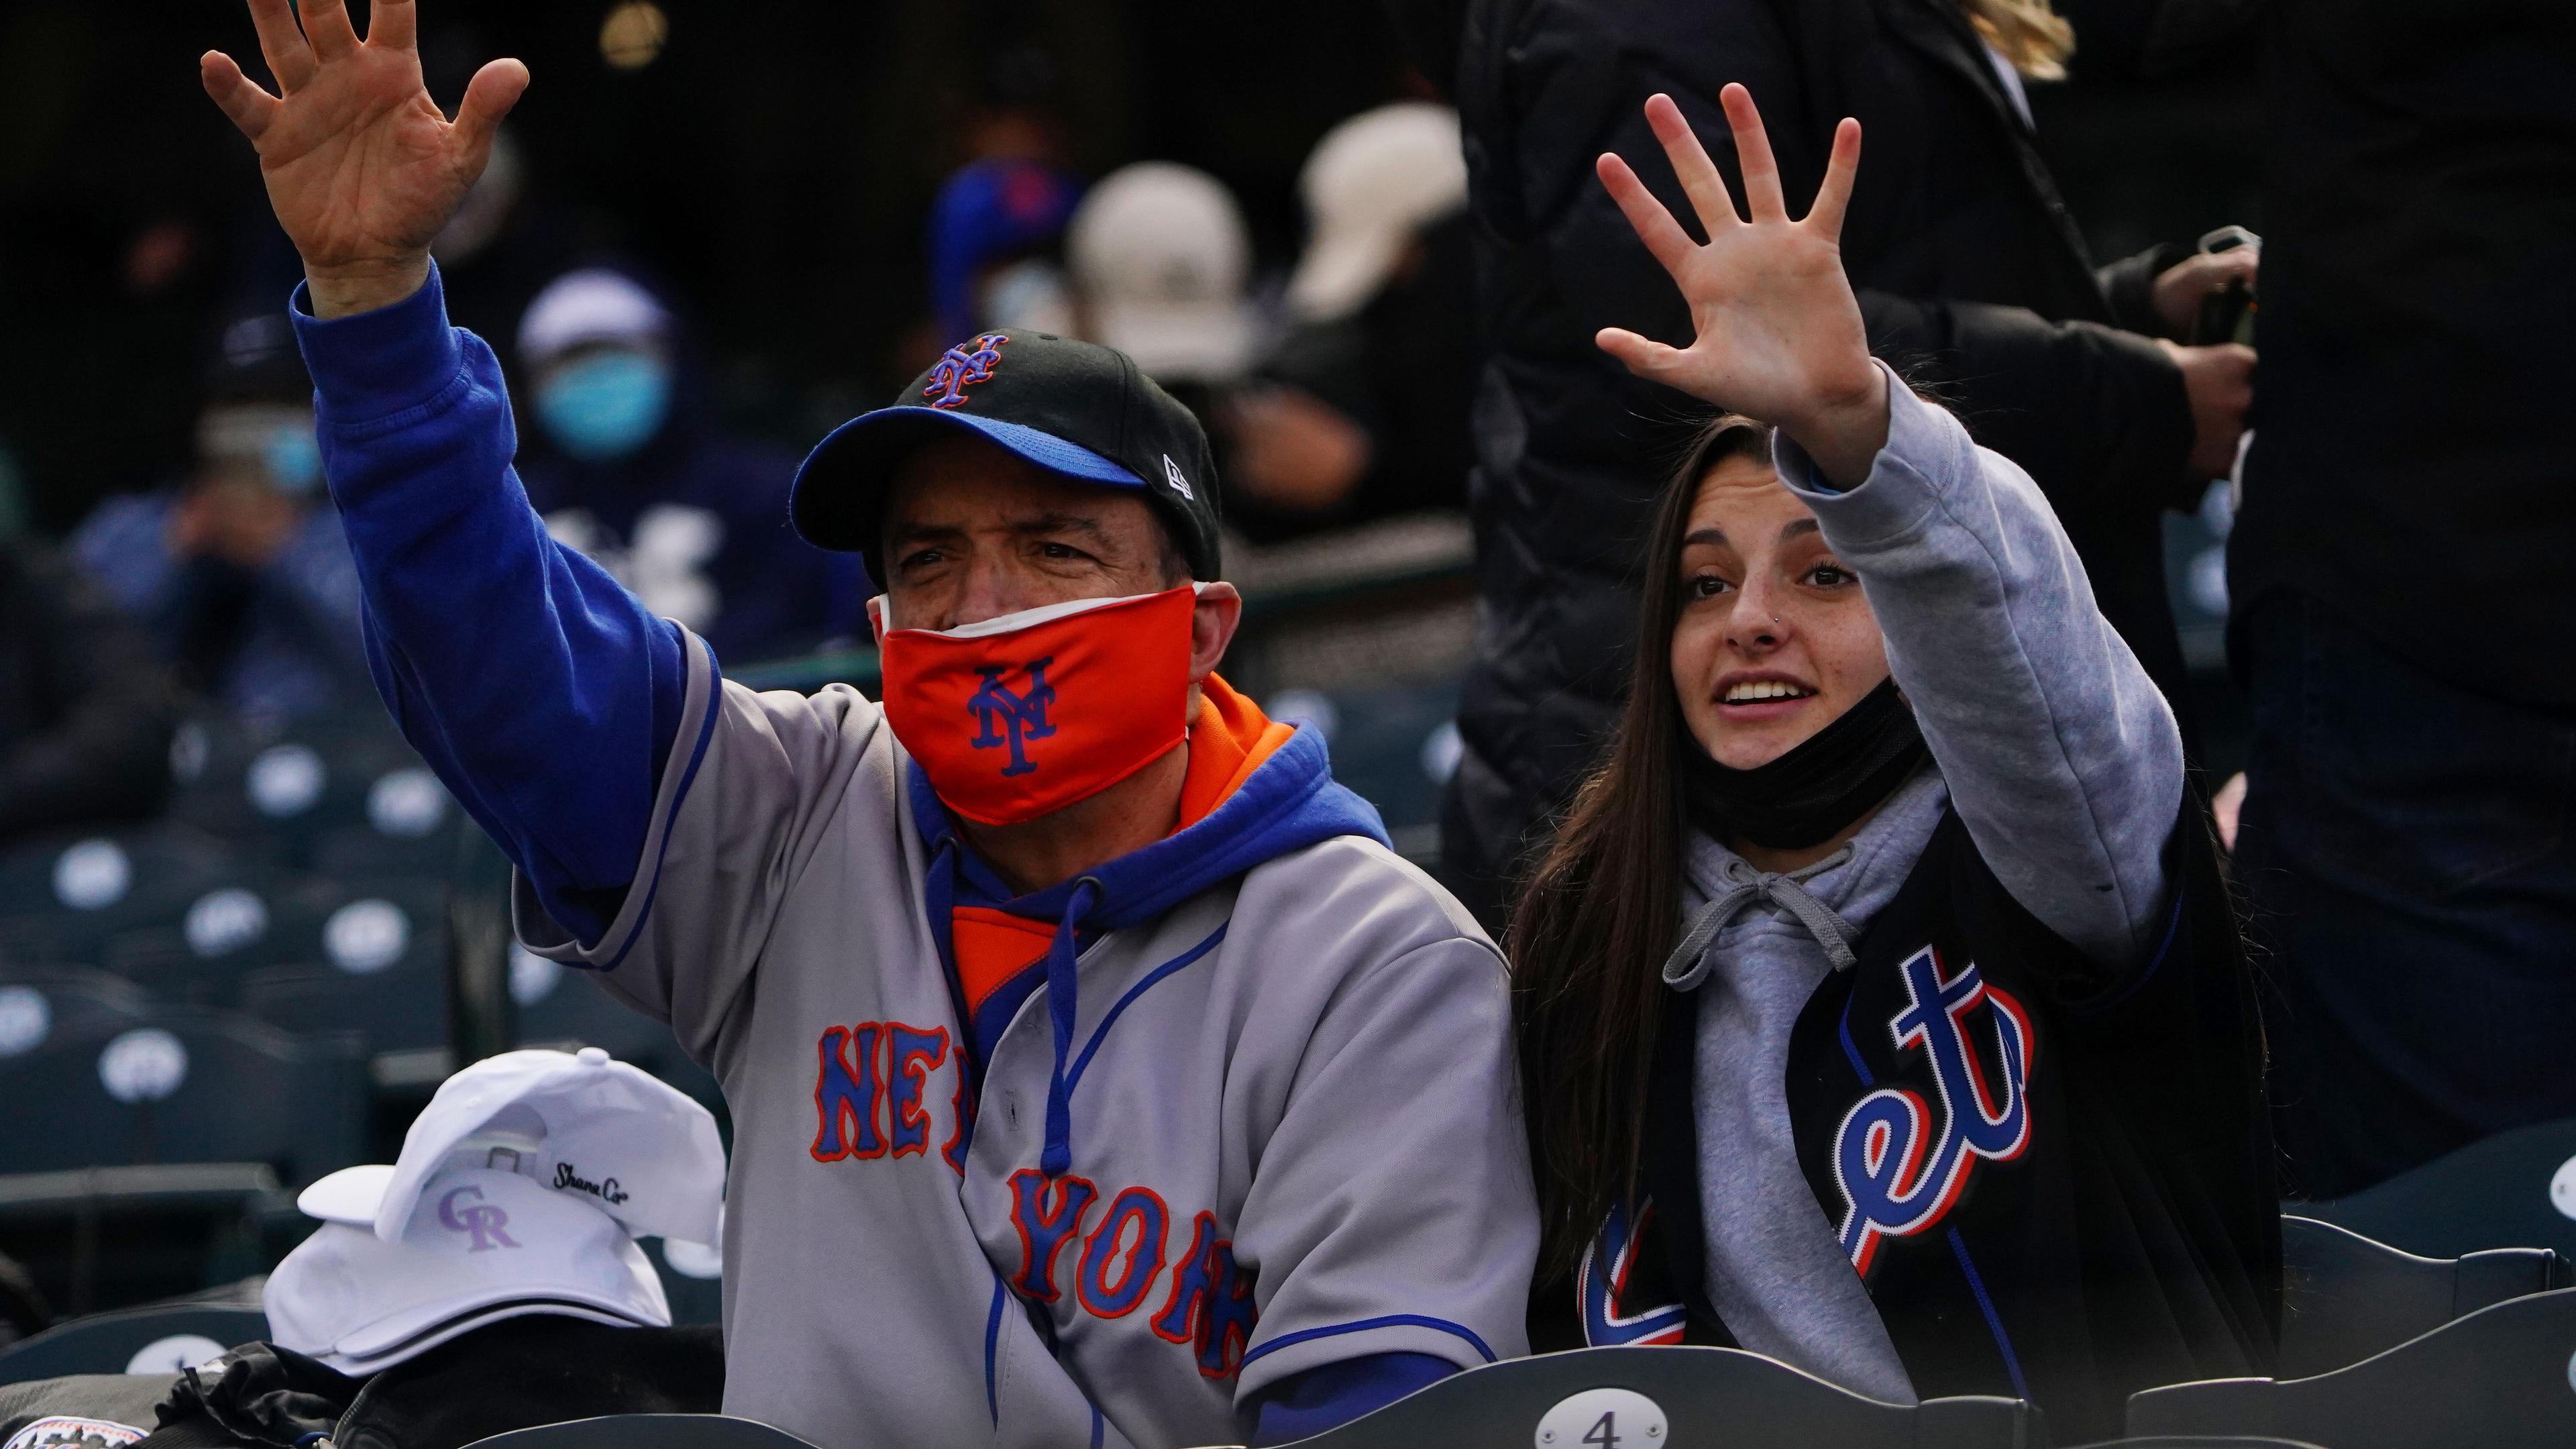 New York Mets fans cheer before the game against the Colorado Rockies at Coors Field. / Ron Chenoy-USA TODAY Sports